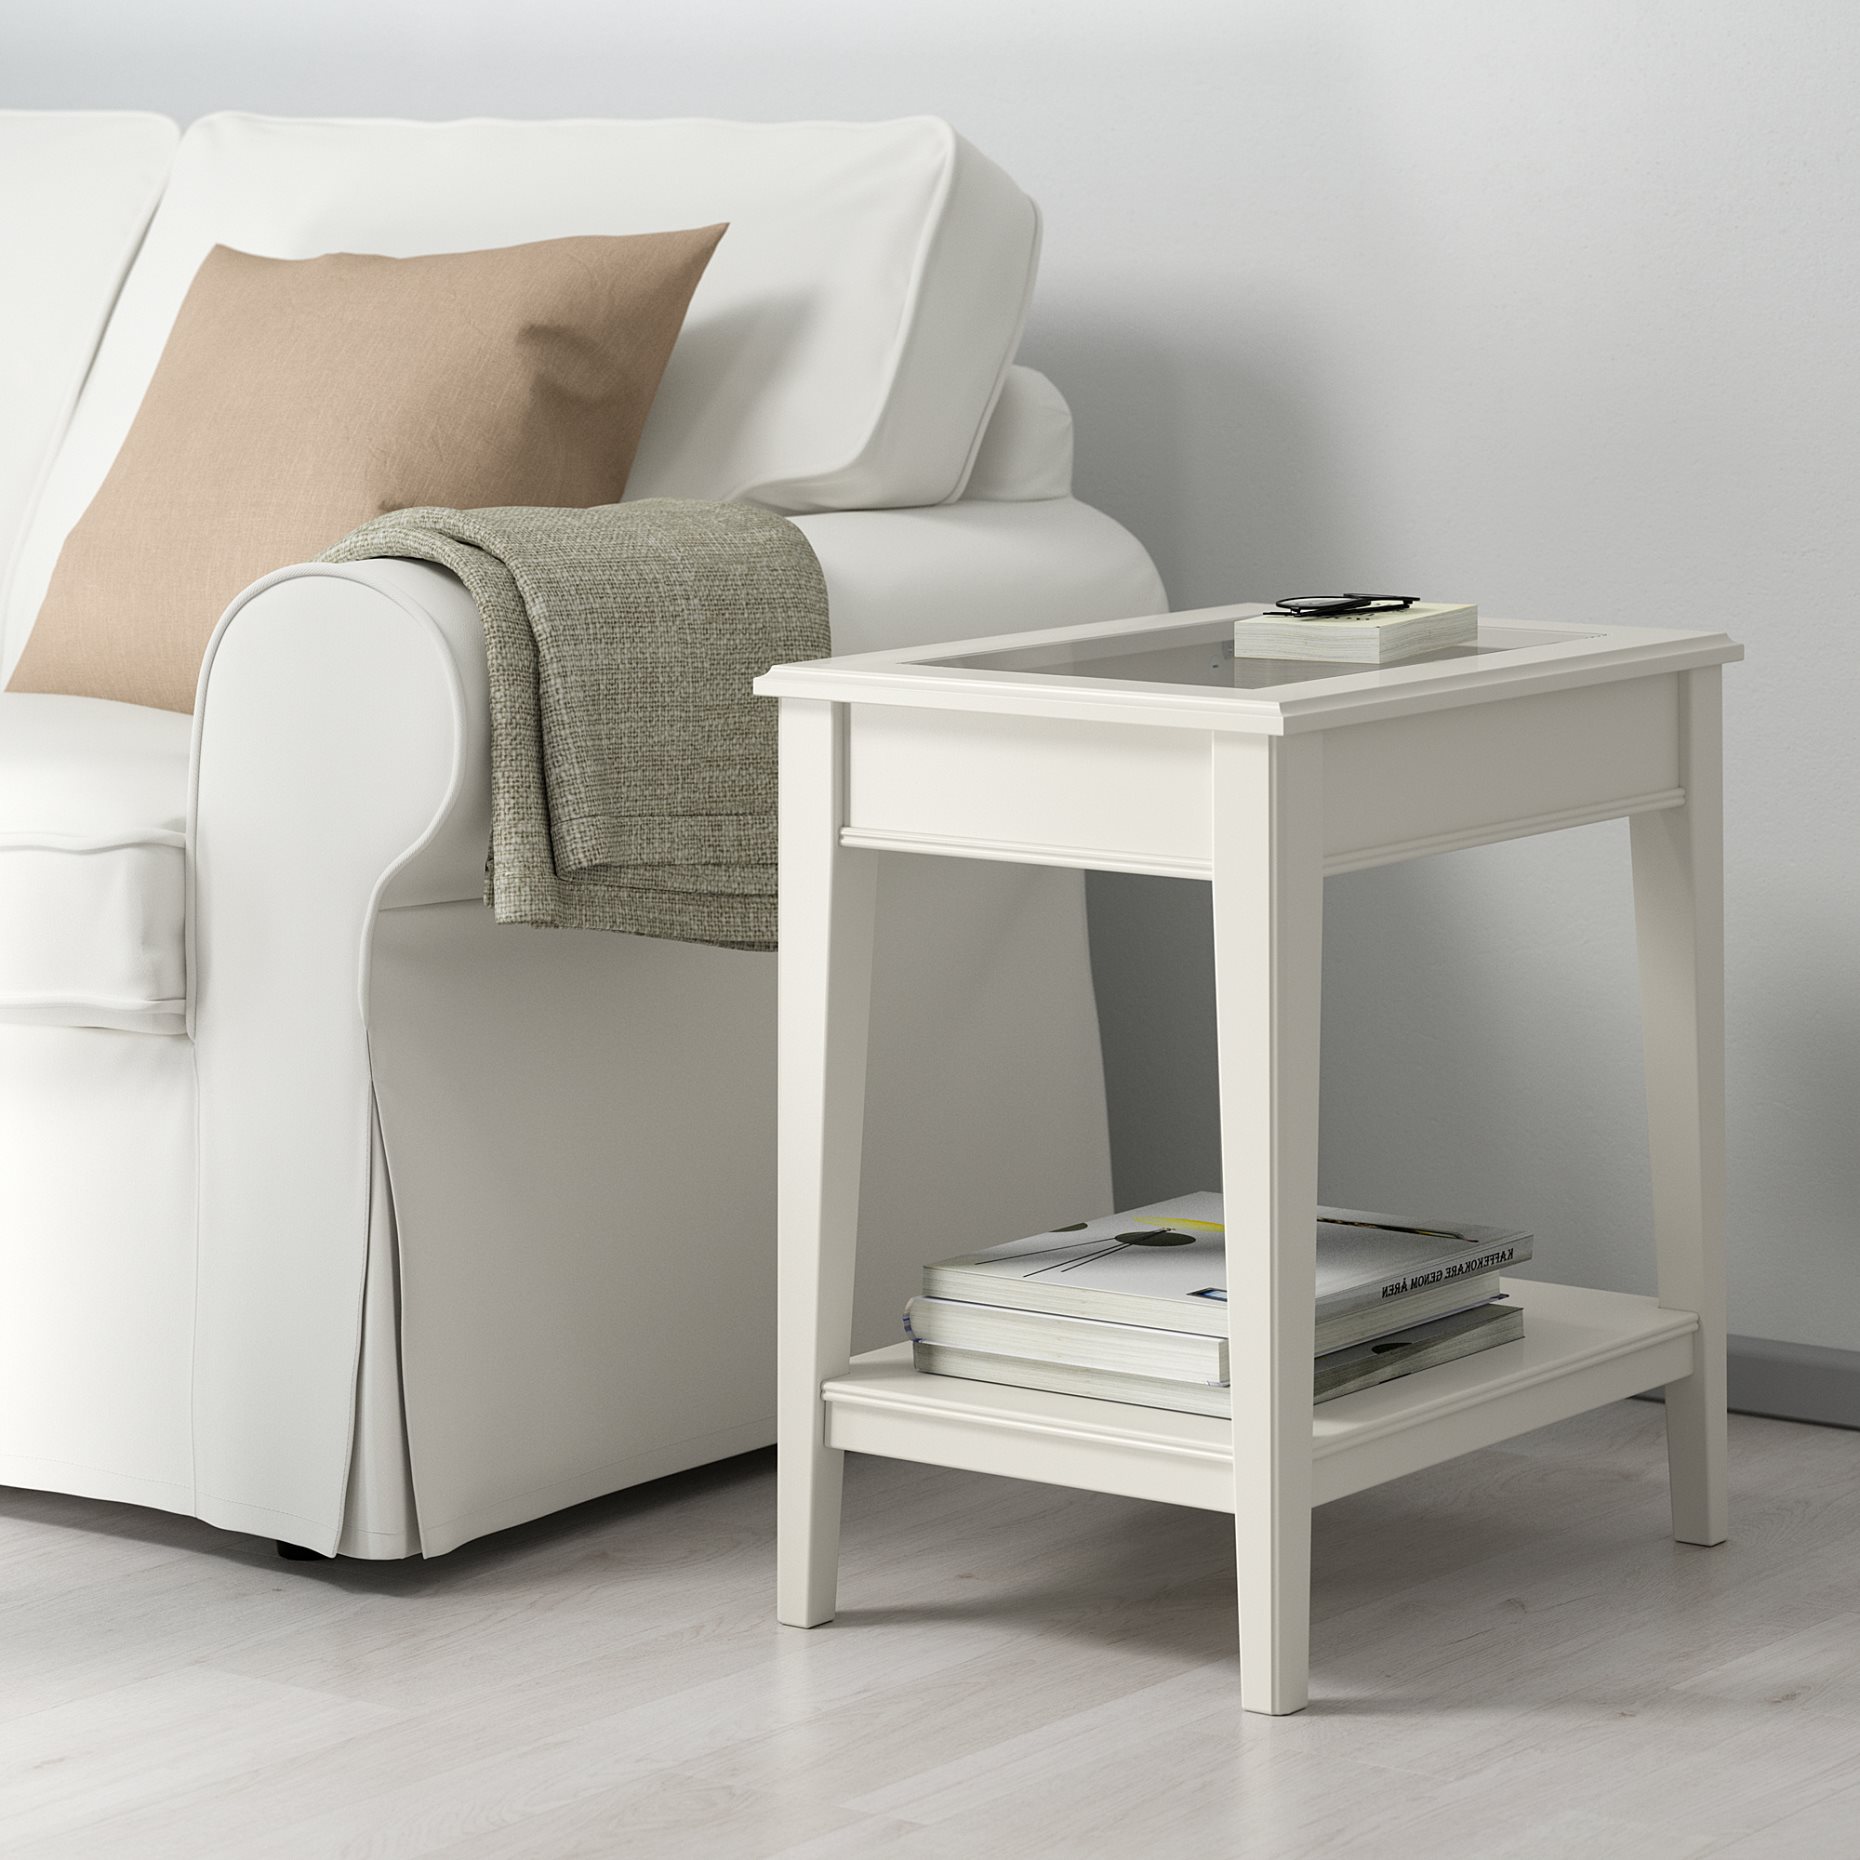 LIATORP, side table, 401.730.65